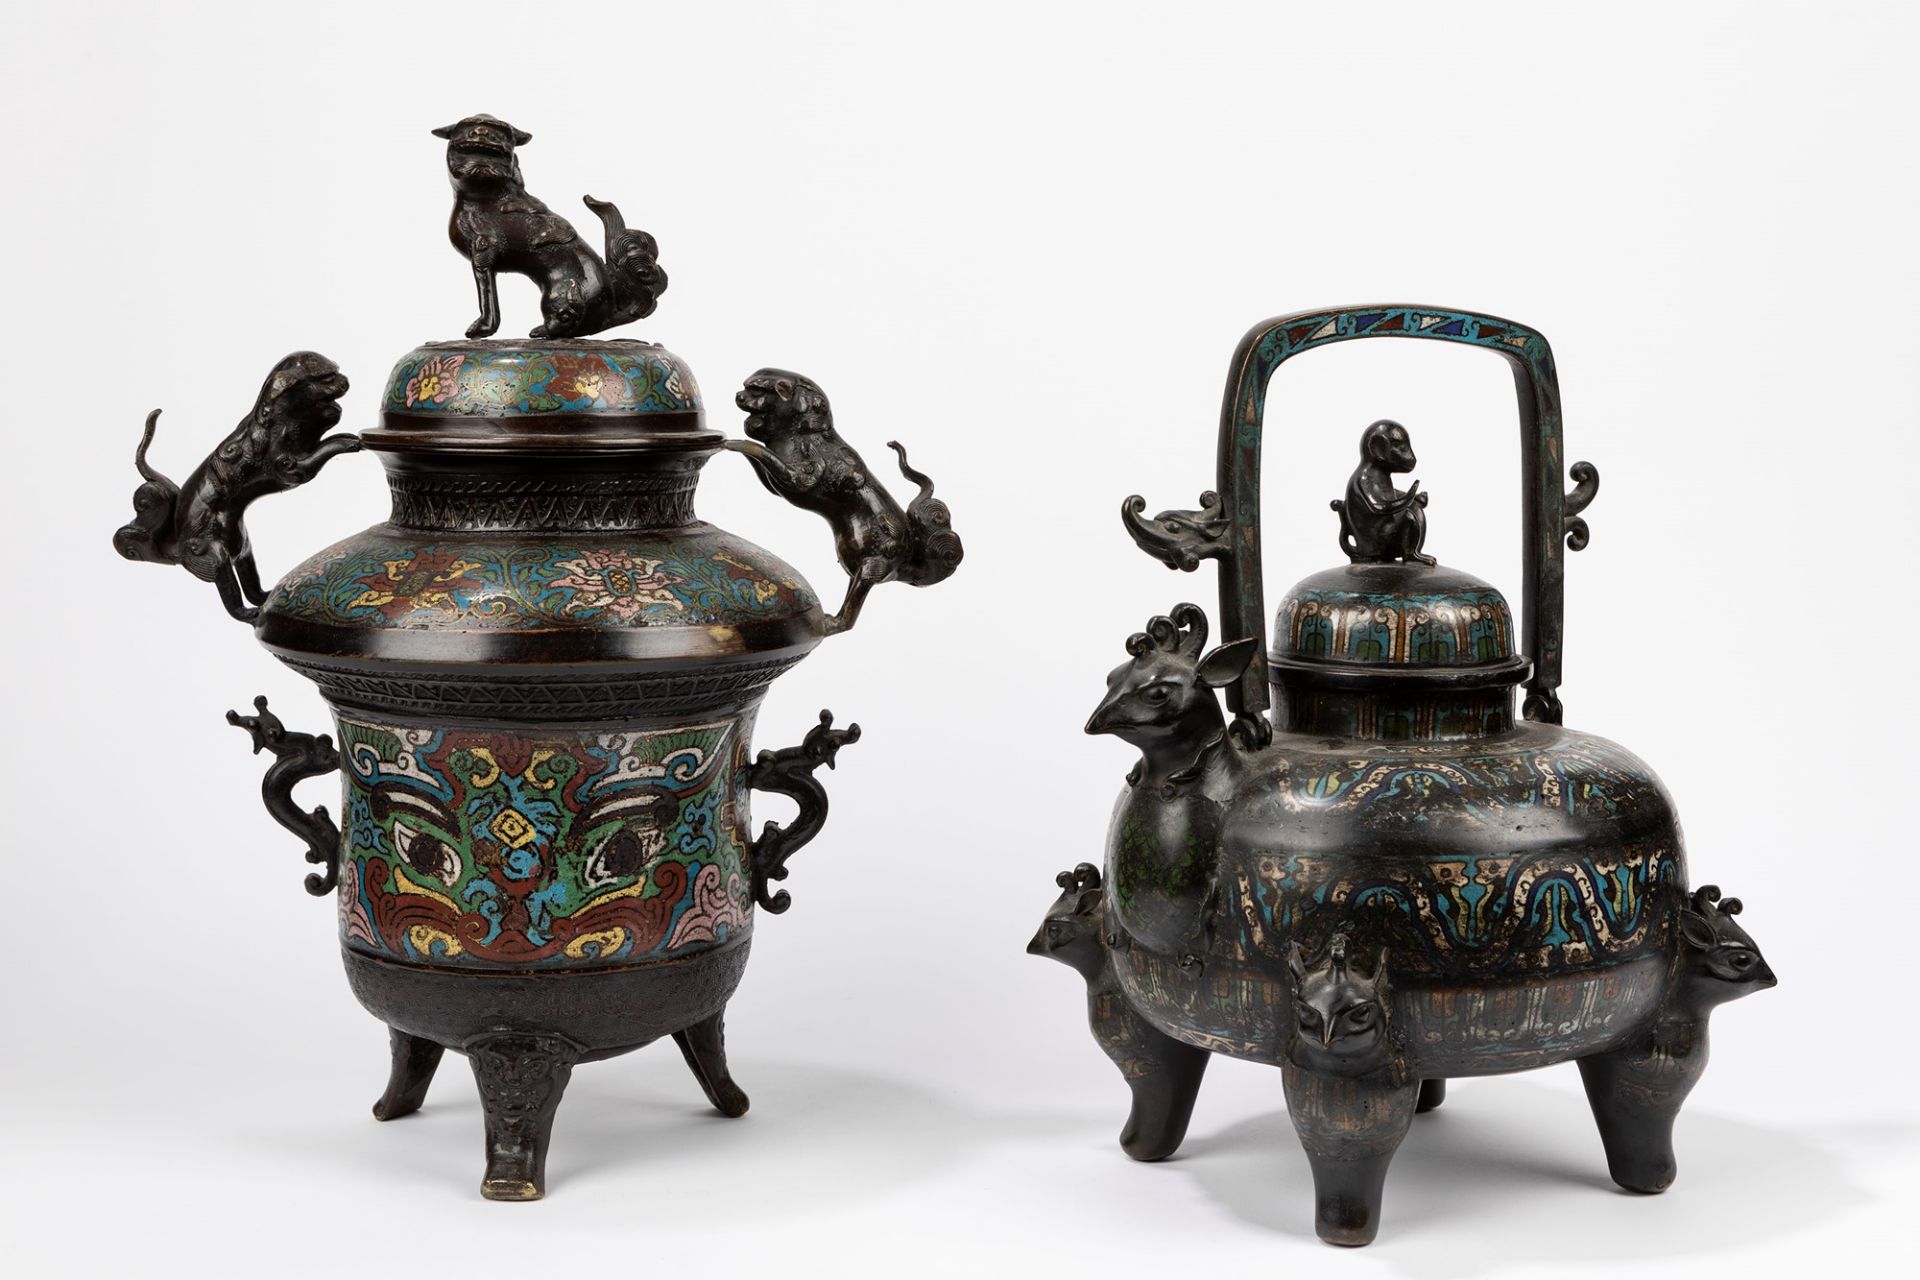 Two bronze and enamel censers, Japan, early 20th century